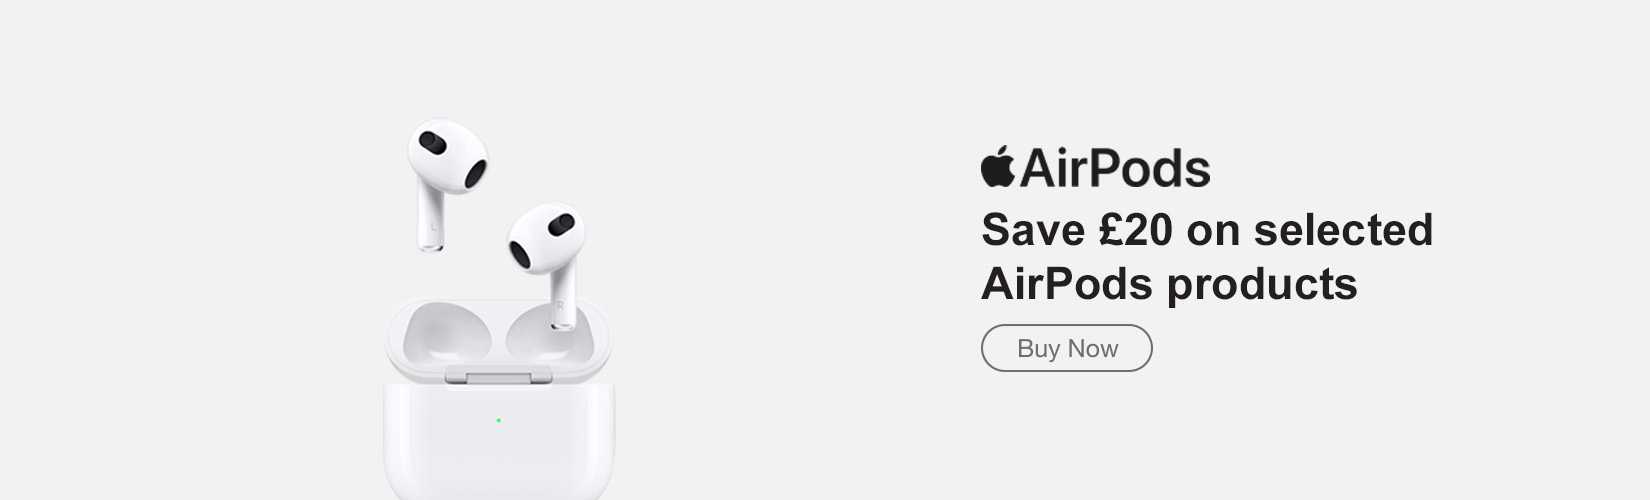 Save £20 on selected Apple AirPods  products.